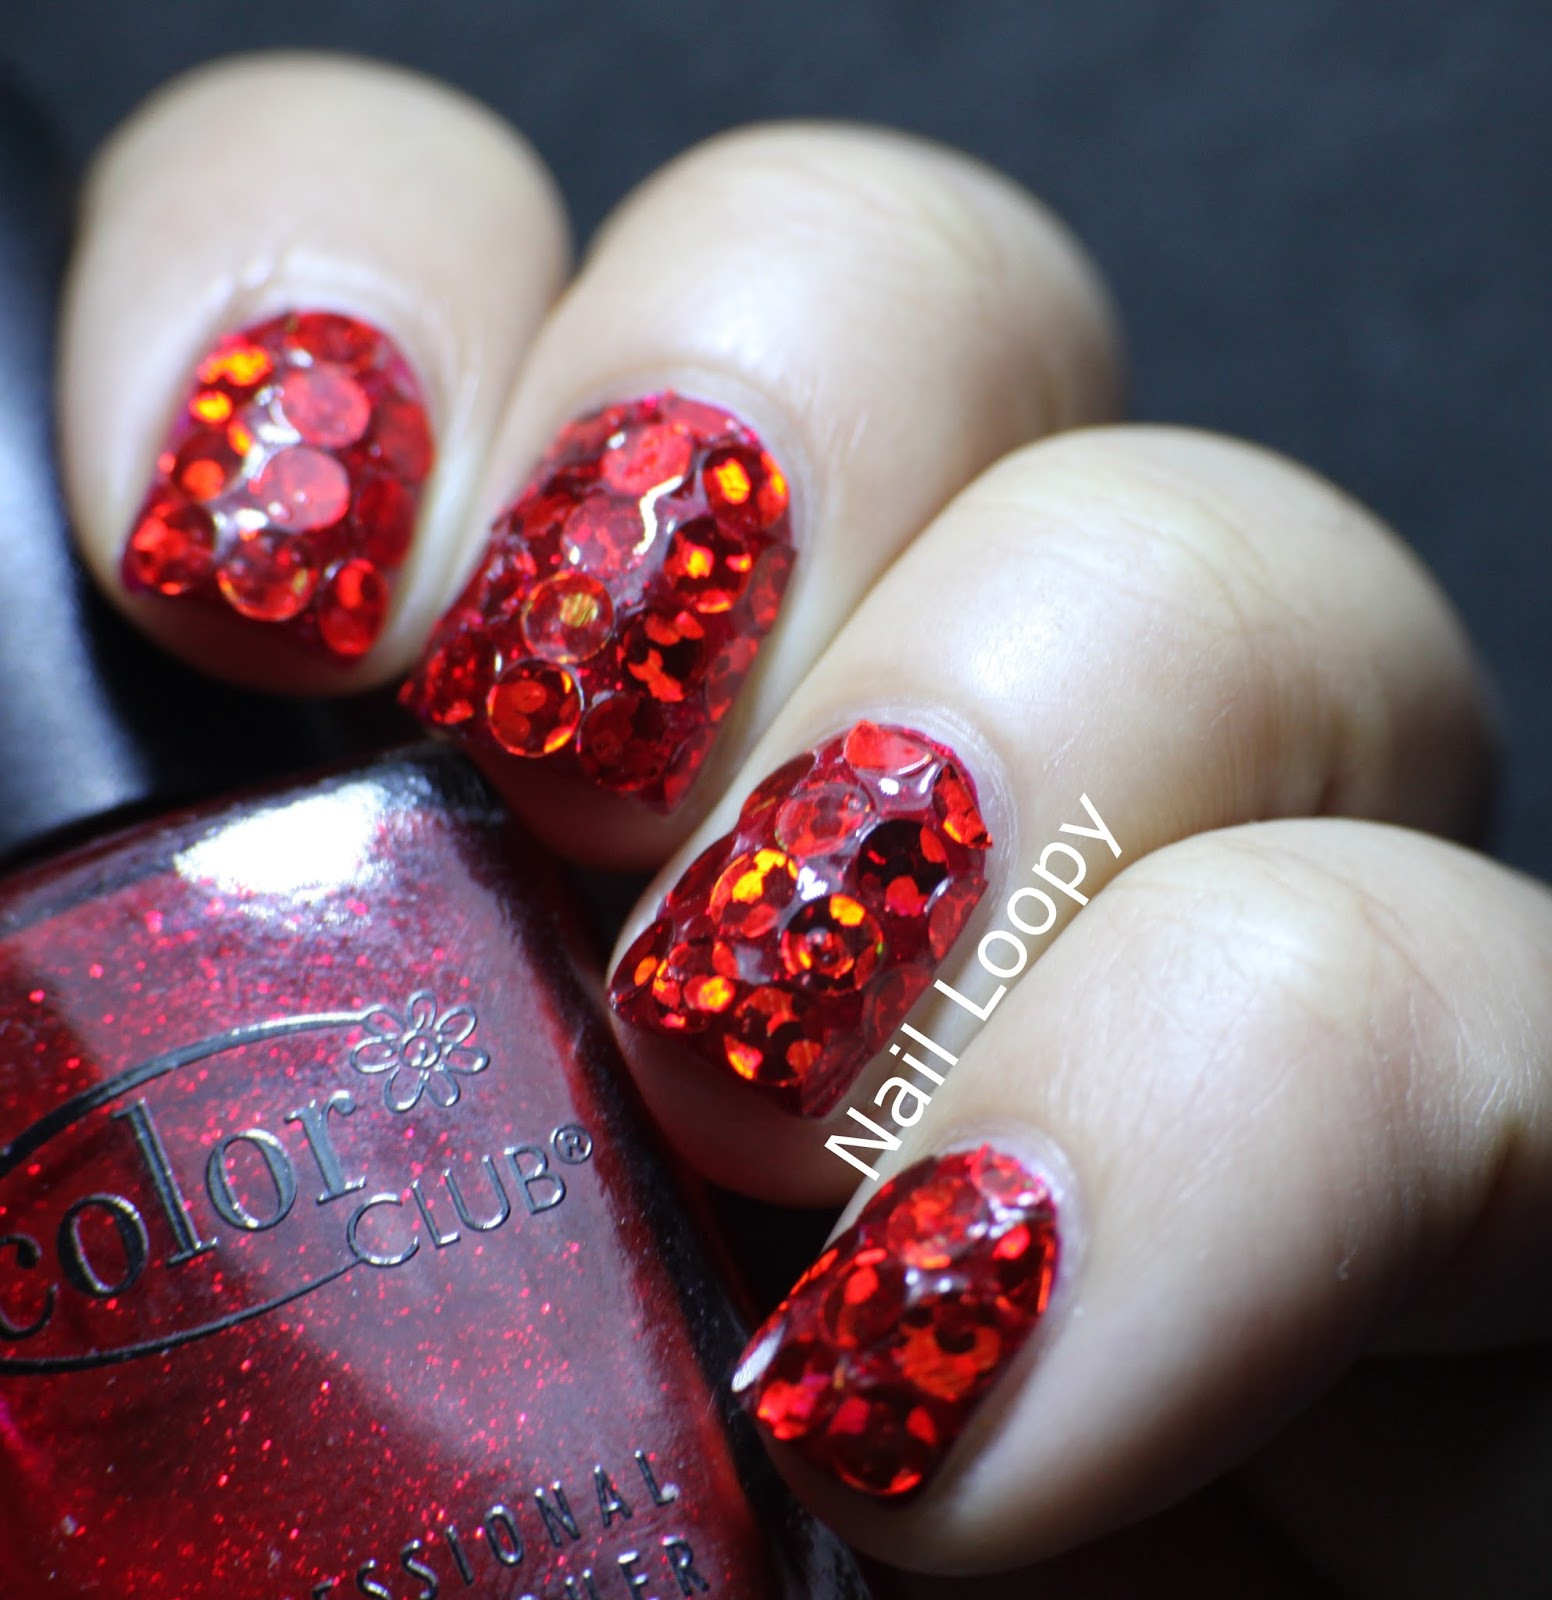 Sparkly Glitter Nails
 nail loopy SUPER HOLOGRPAHIC & SPARKLY RED GLITTER NAILS